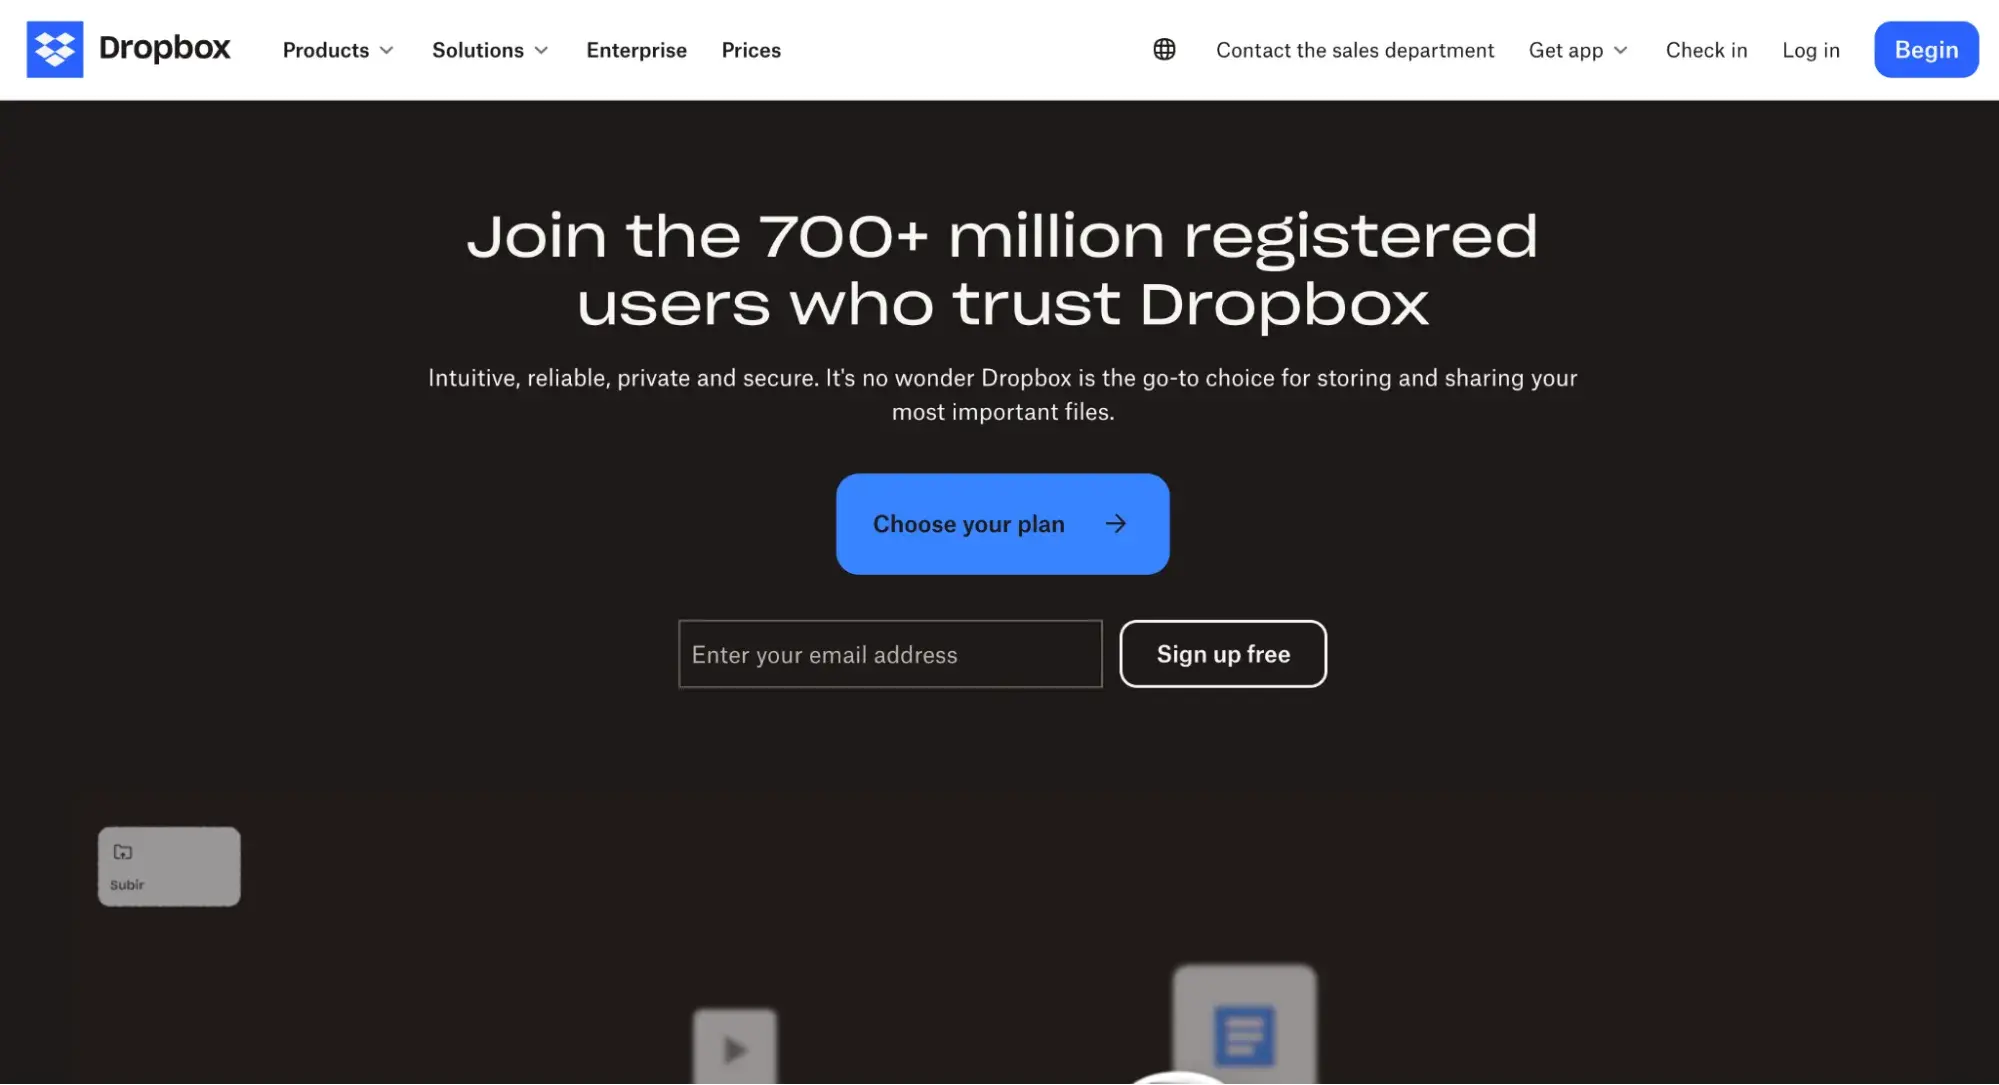 Intuitive design example from dropbox website